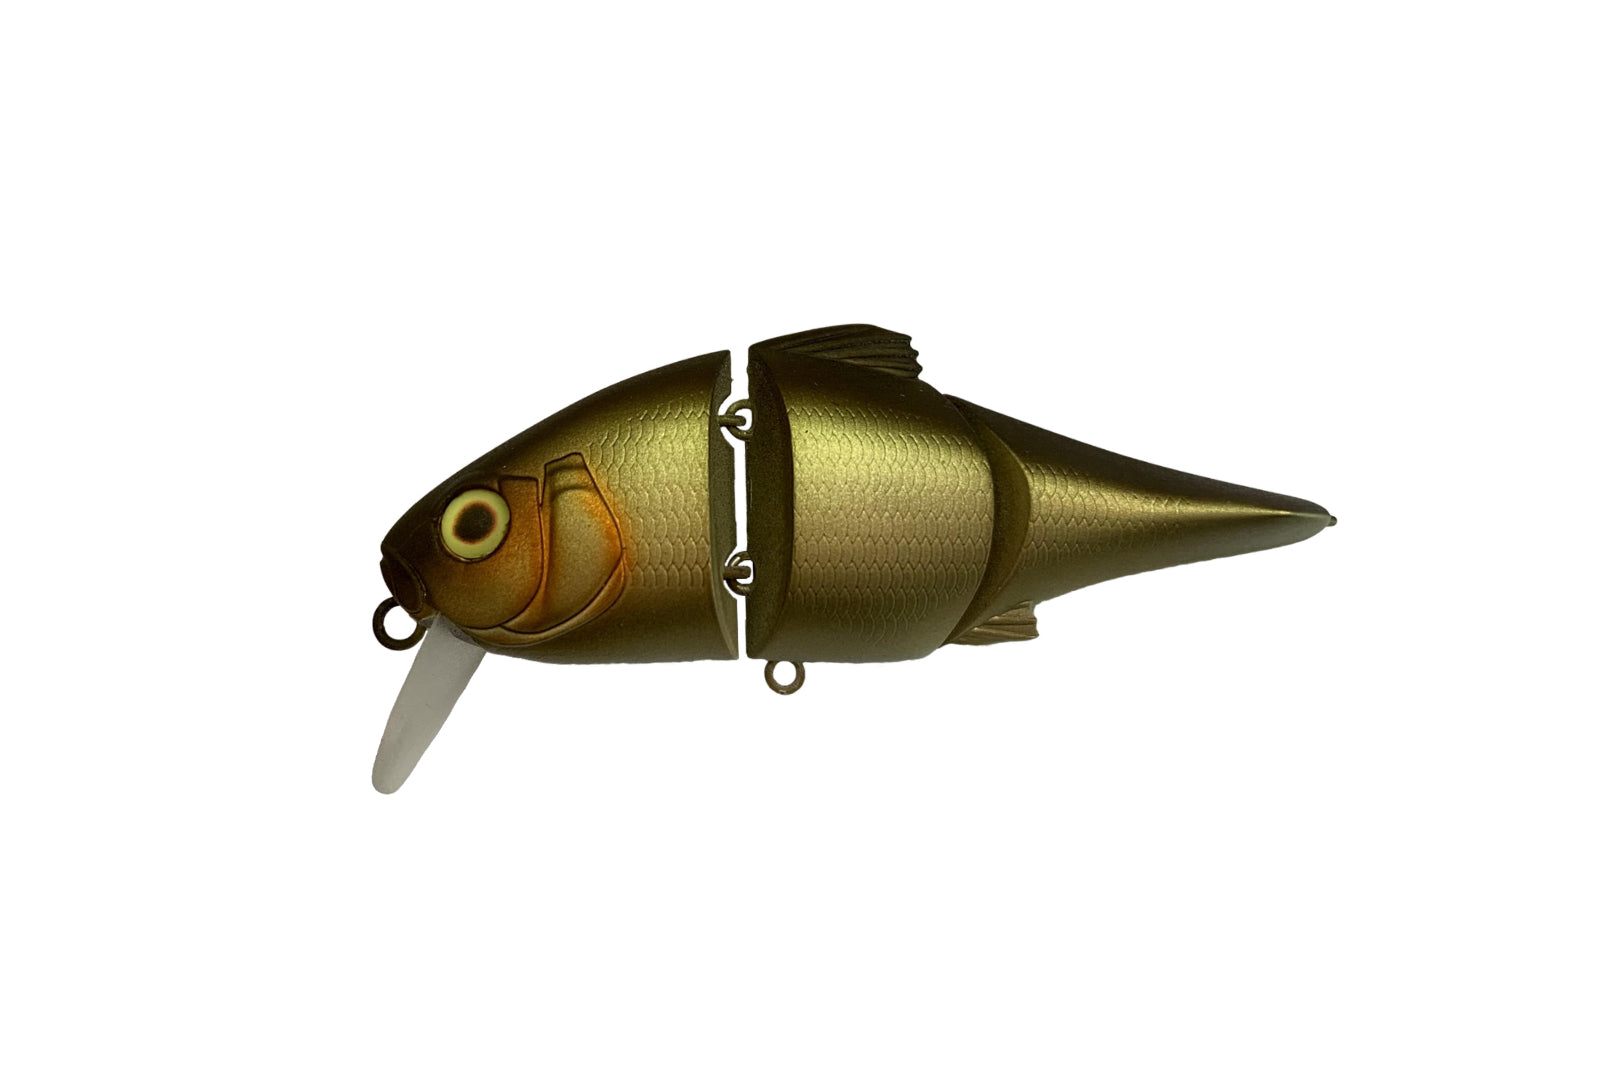 Jackall Swing Mikey 72mm Floating - BROWN DOG - Mansfield Hunting & Fishing - Products to prepare for Corona Virus